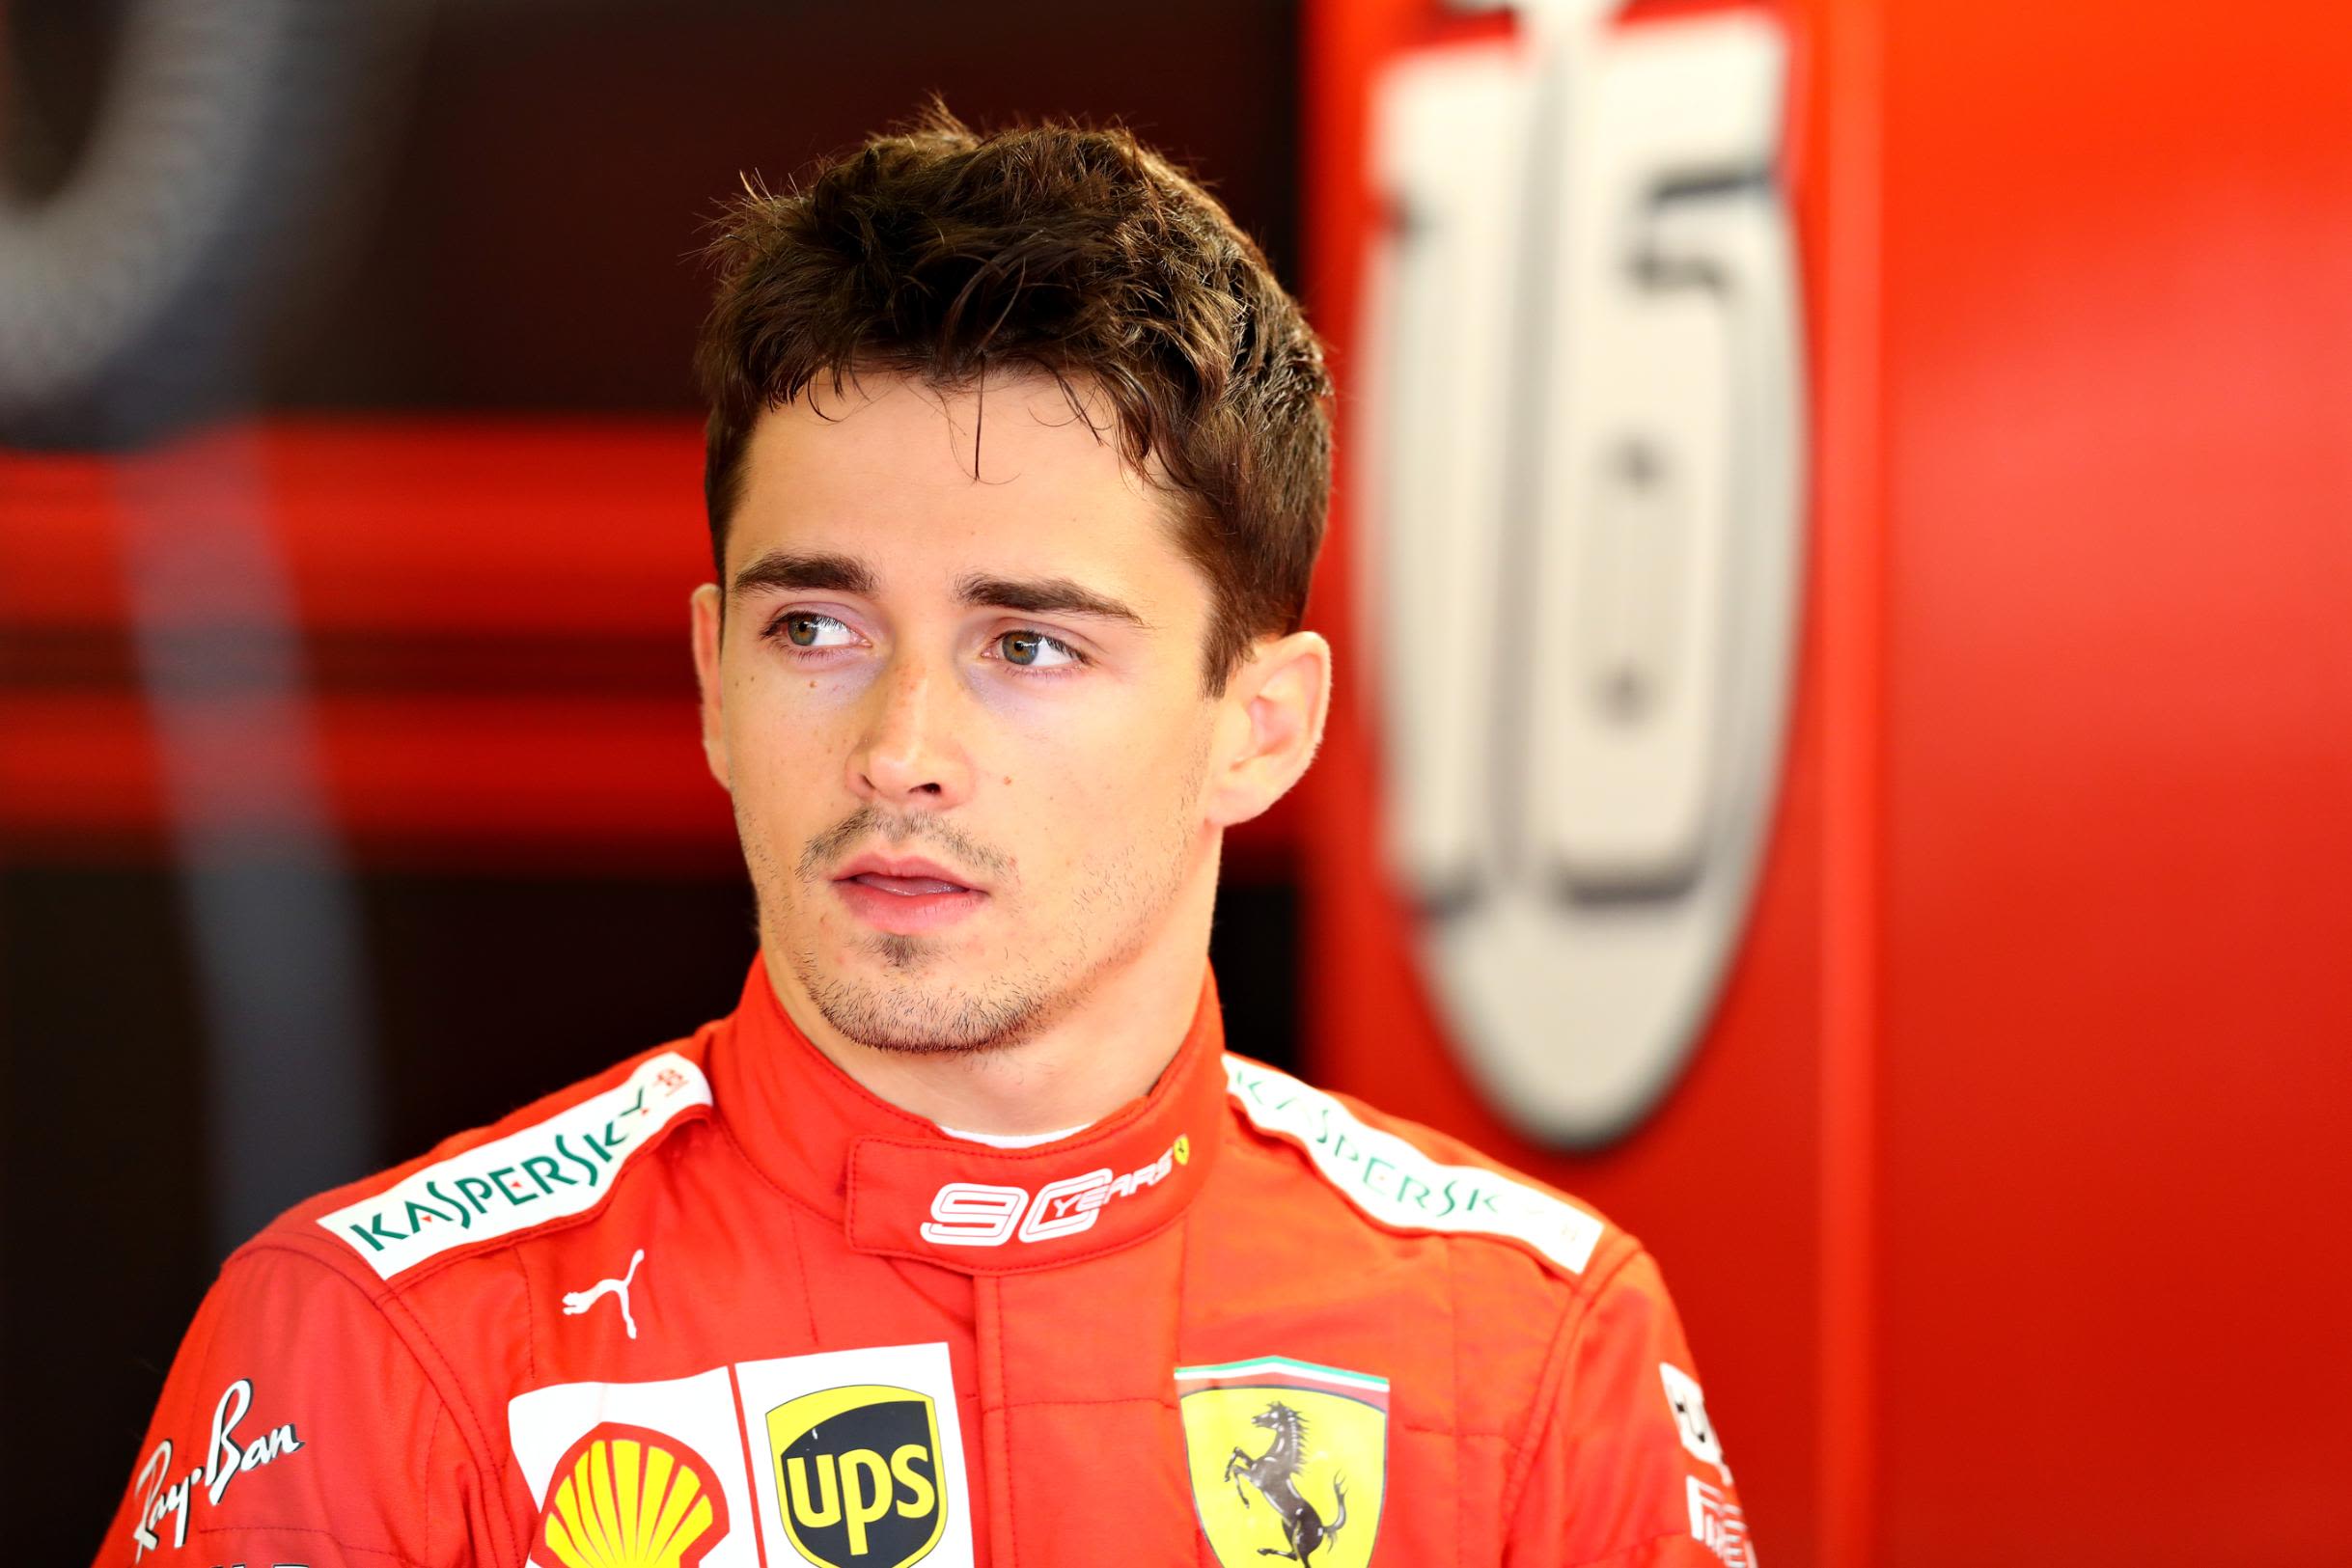 Ferrari youngster Charles Leclerc dreams of 'becoming world champion' | CNN